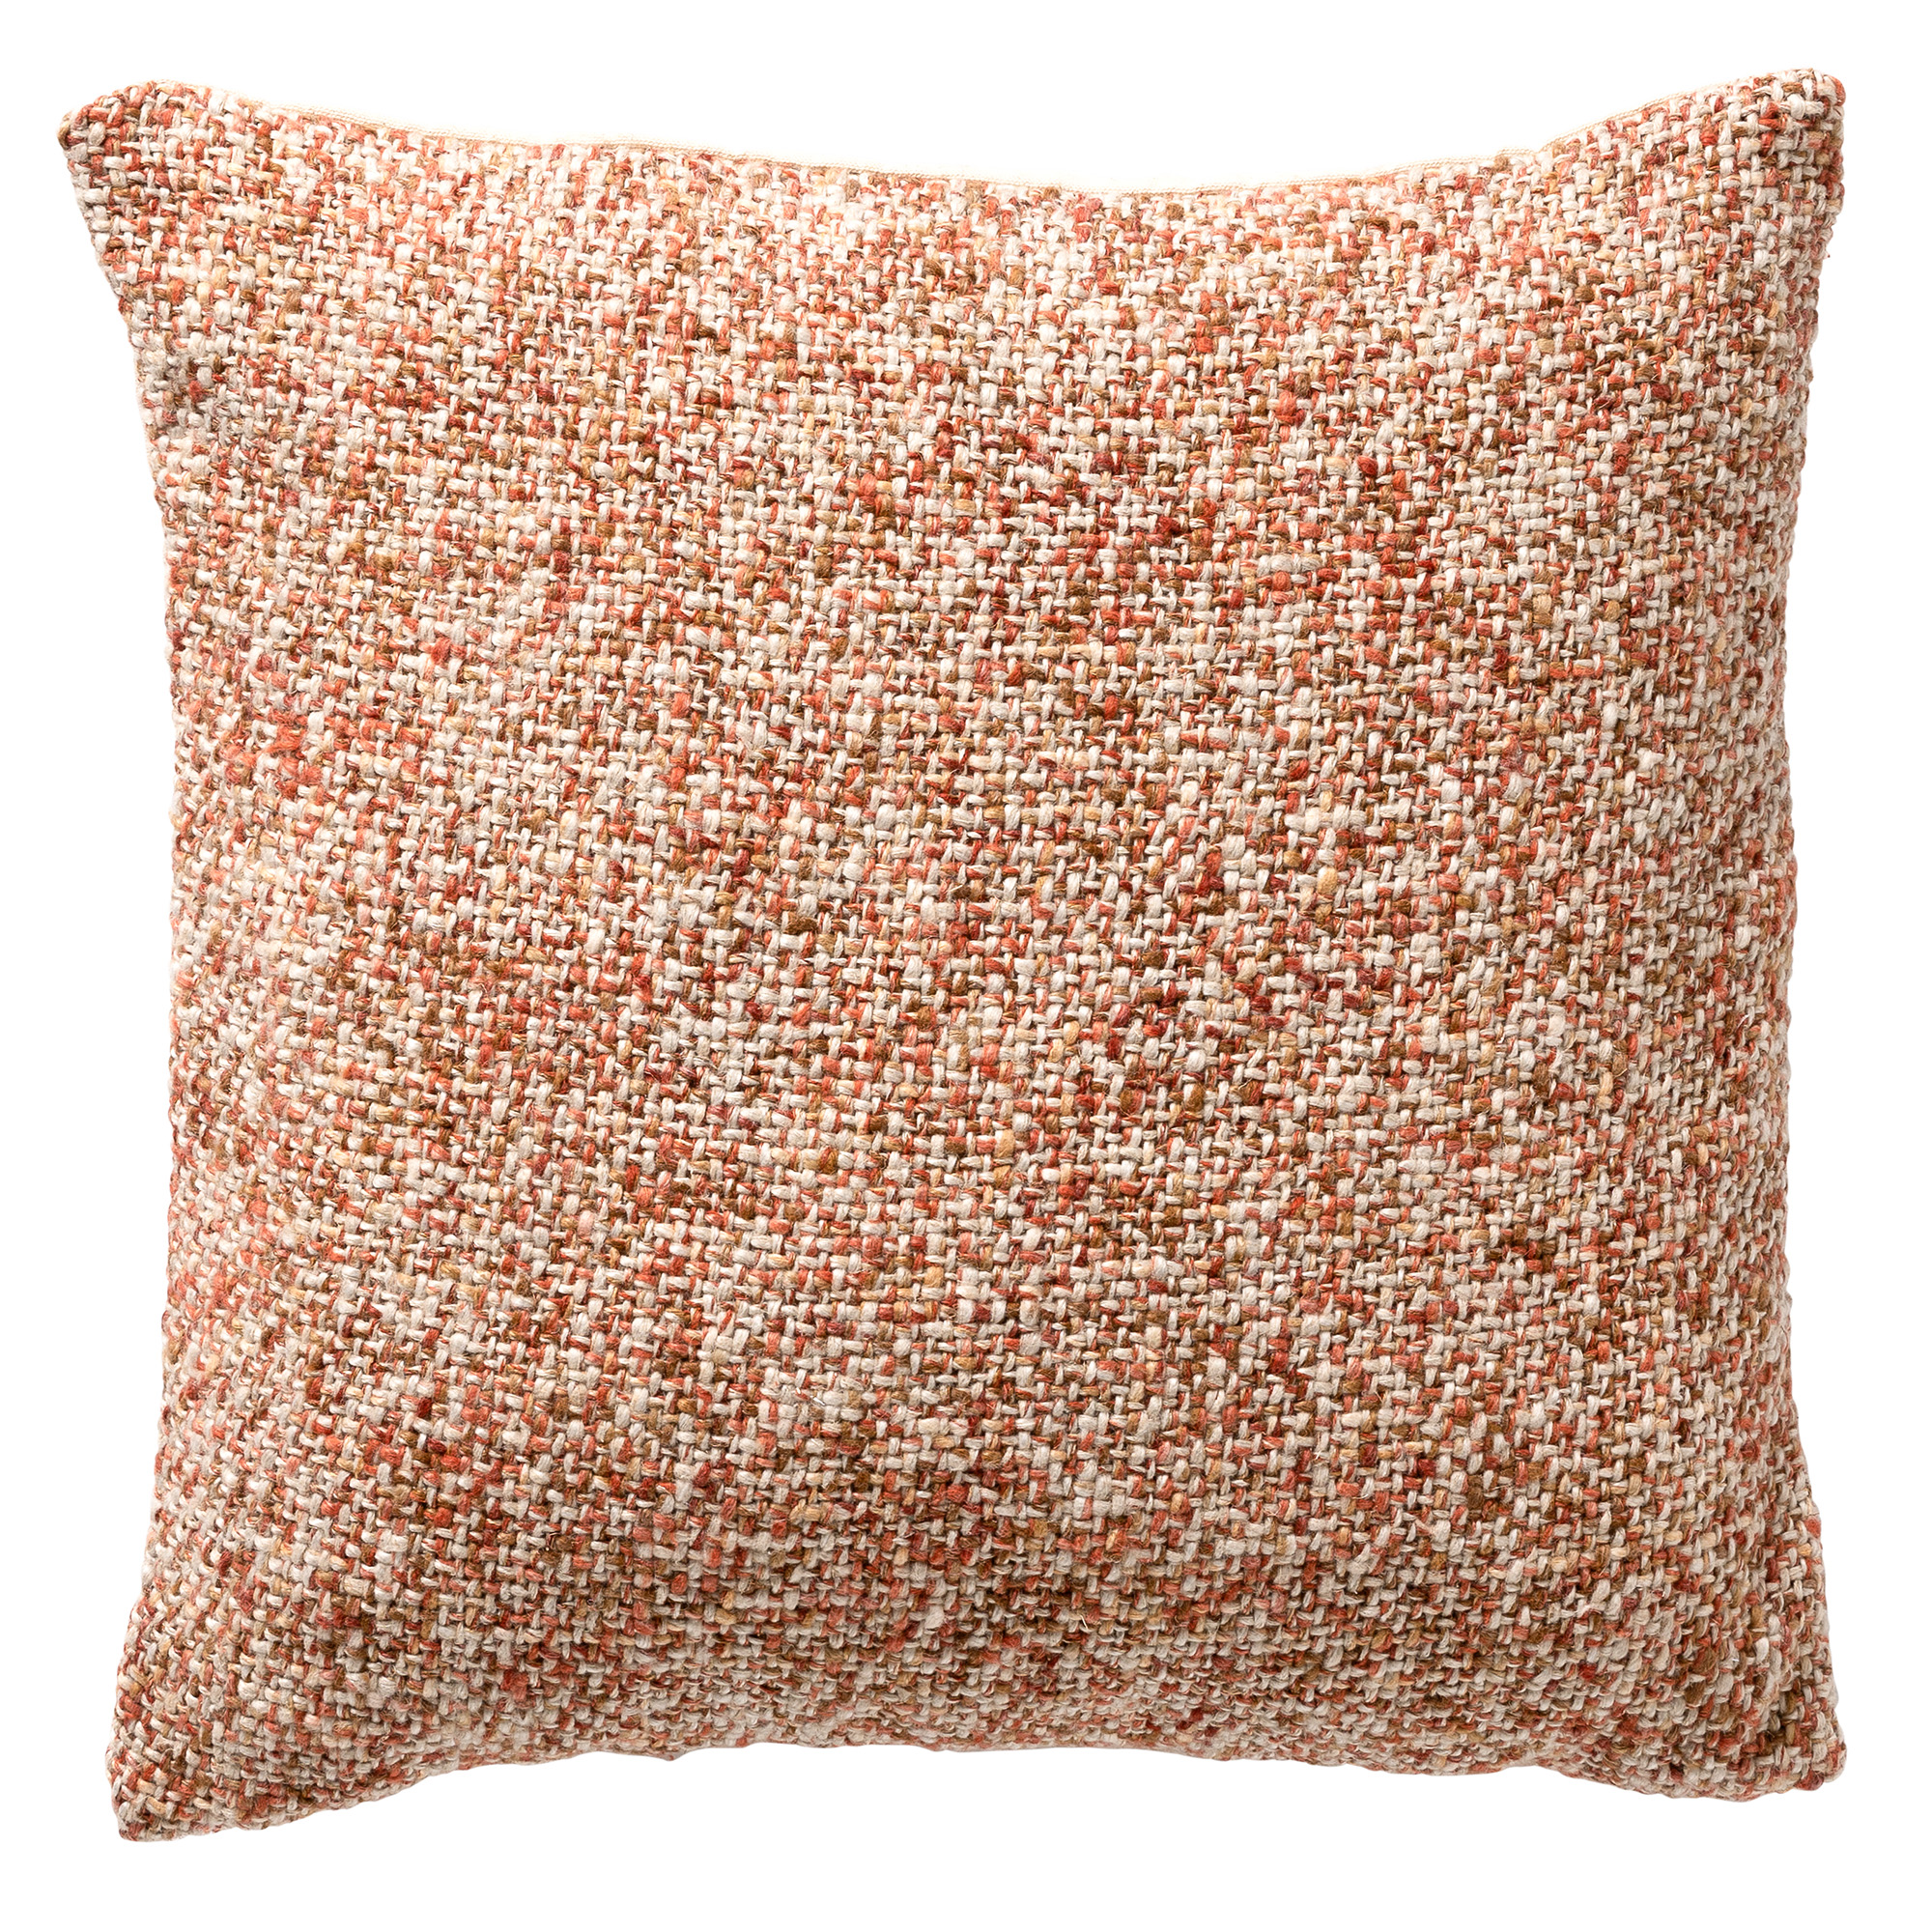 JOEY - Cushion cover 45x45 cm 70% gereclycled cotton - Eco Line collection - Potters Clay - orange